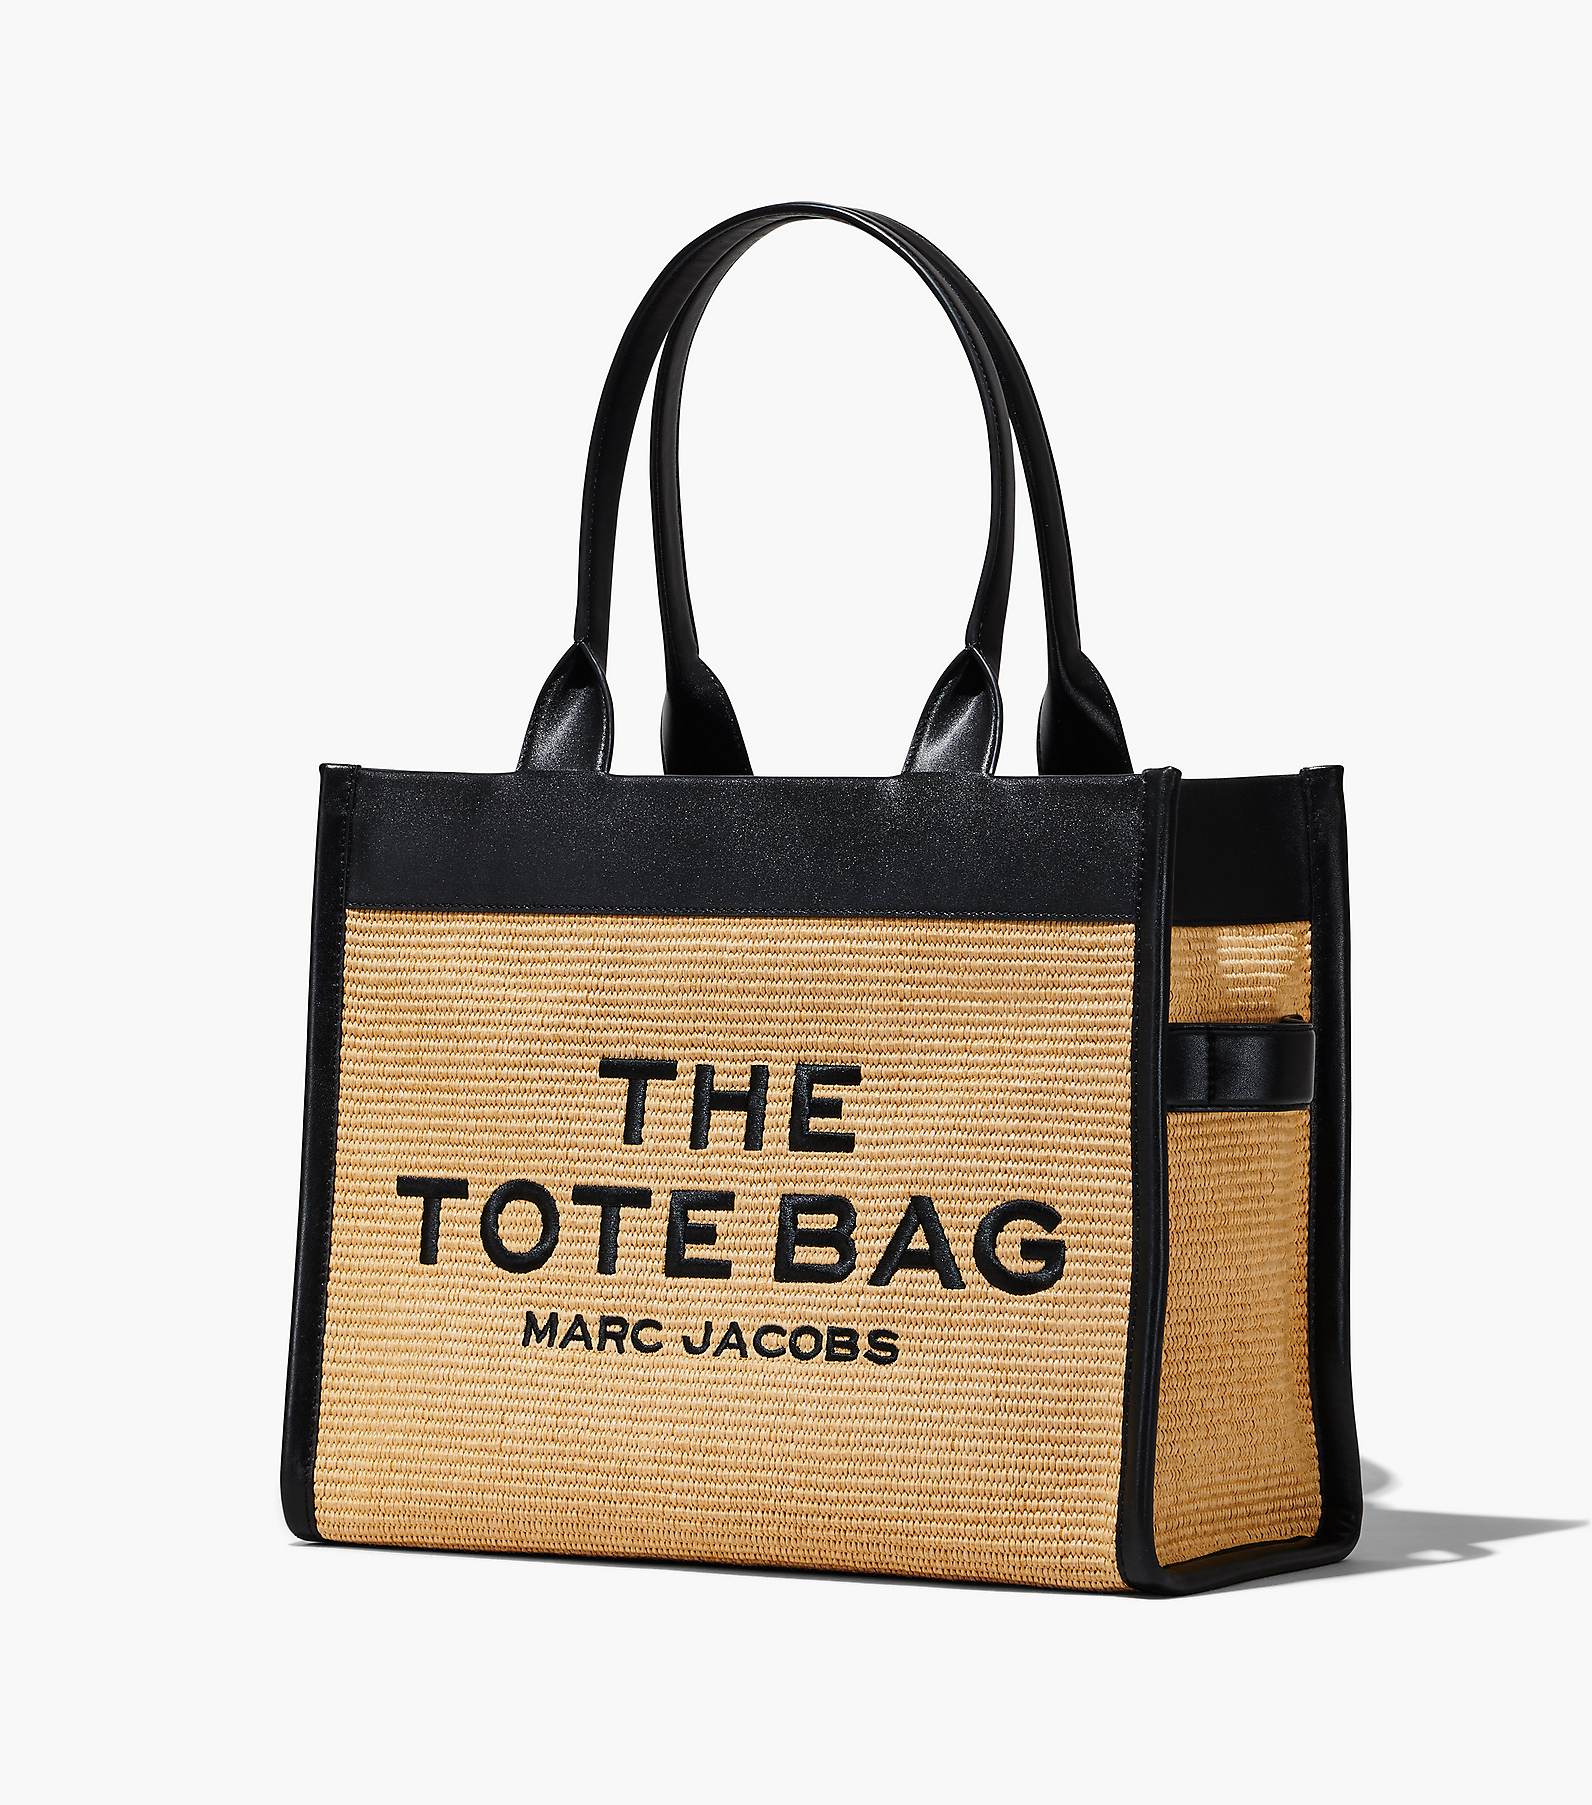 The Large Tote bag